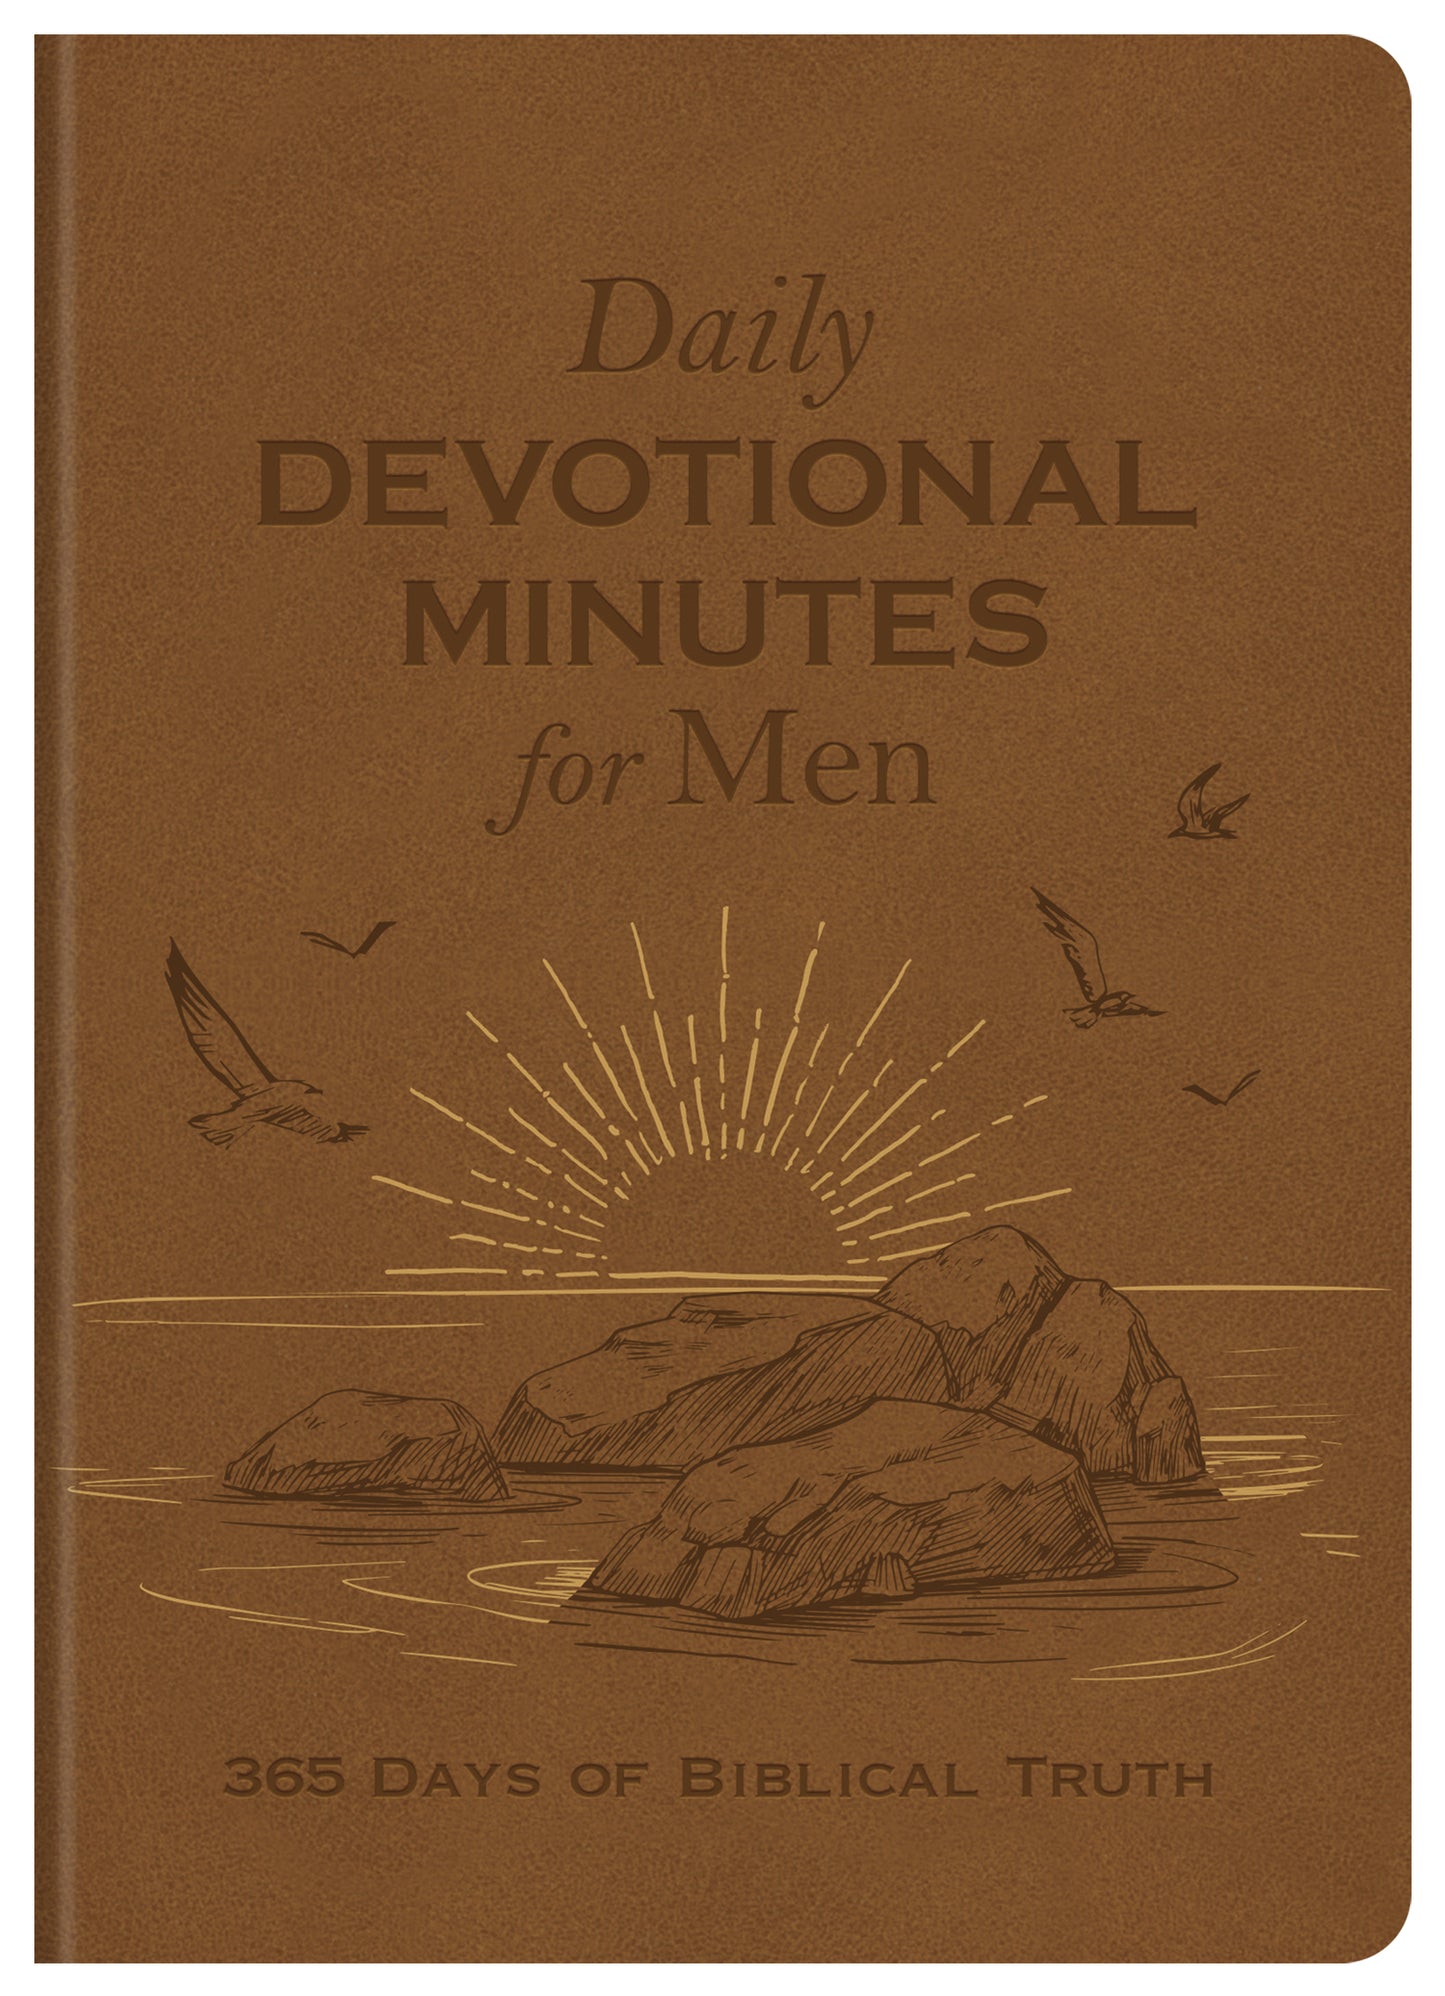 Daily Devotional Minutes for Men - The Christian Gift Company